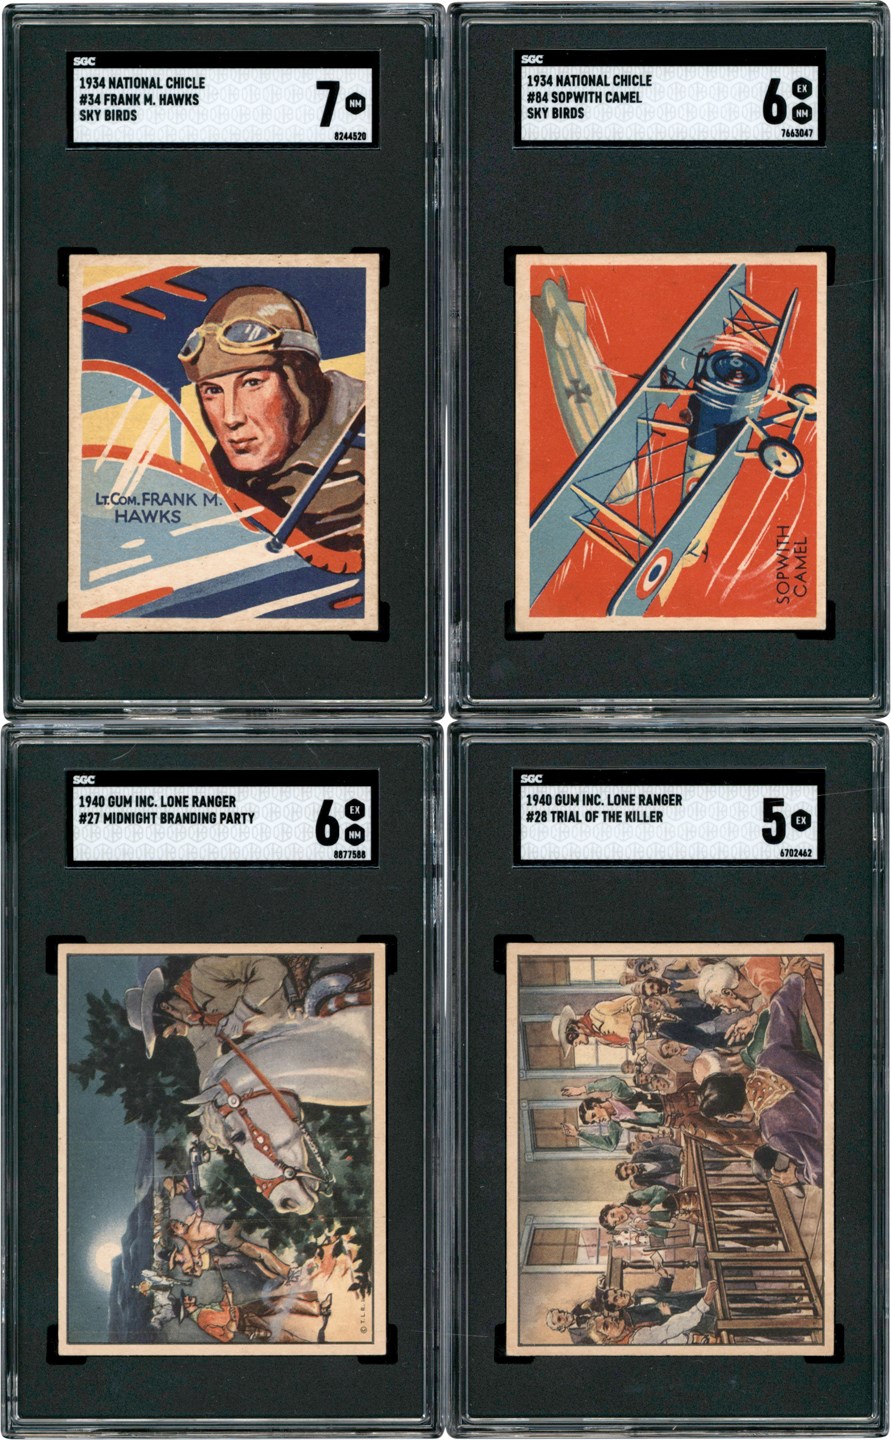 Non-Sports Cards - 1933-1940 National Chicle Sky Birds & Gum Inc Lone Ranger Card Collection (62)